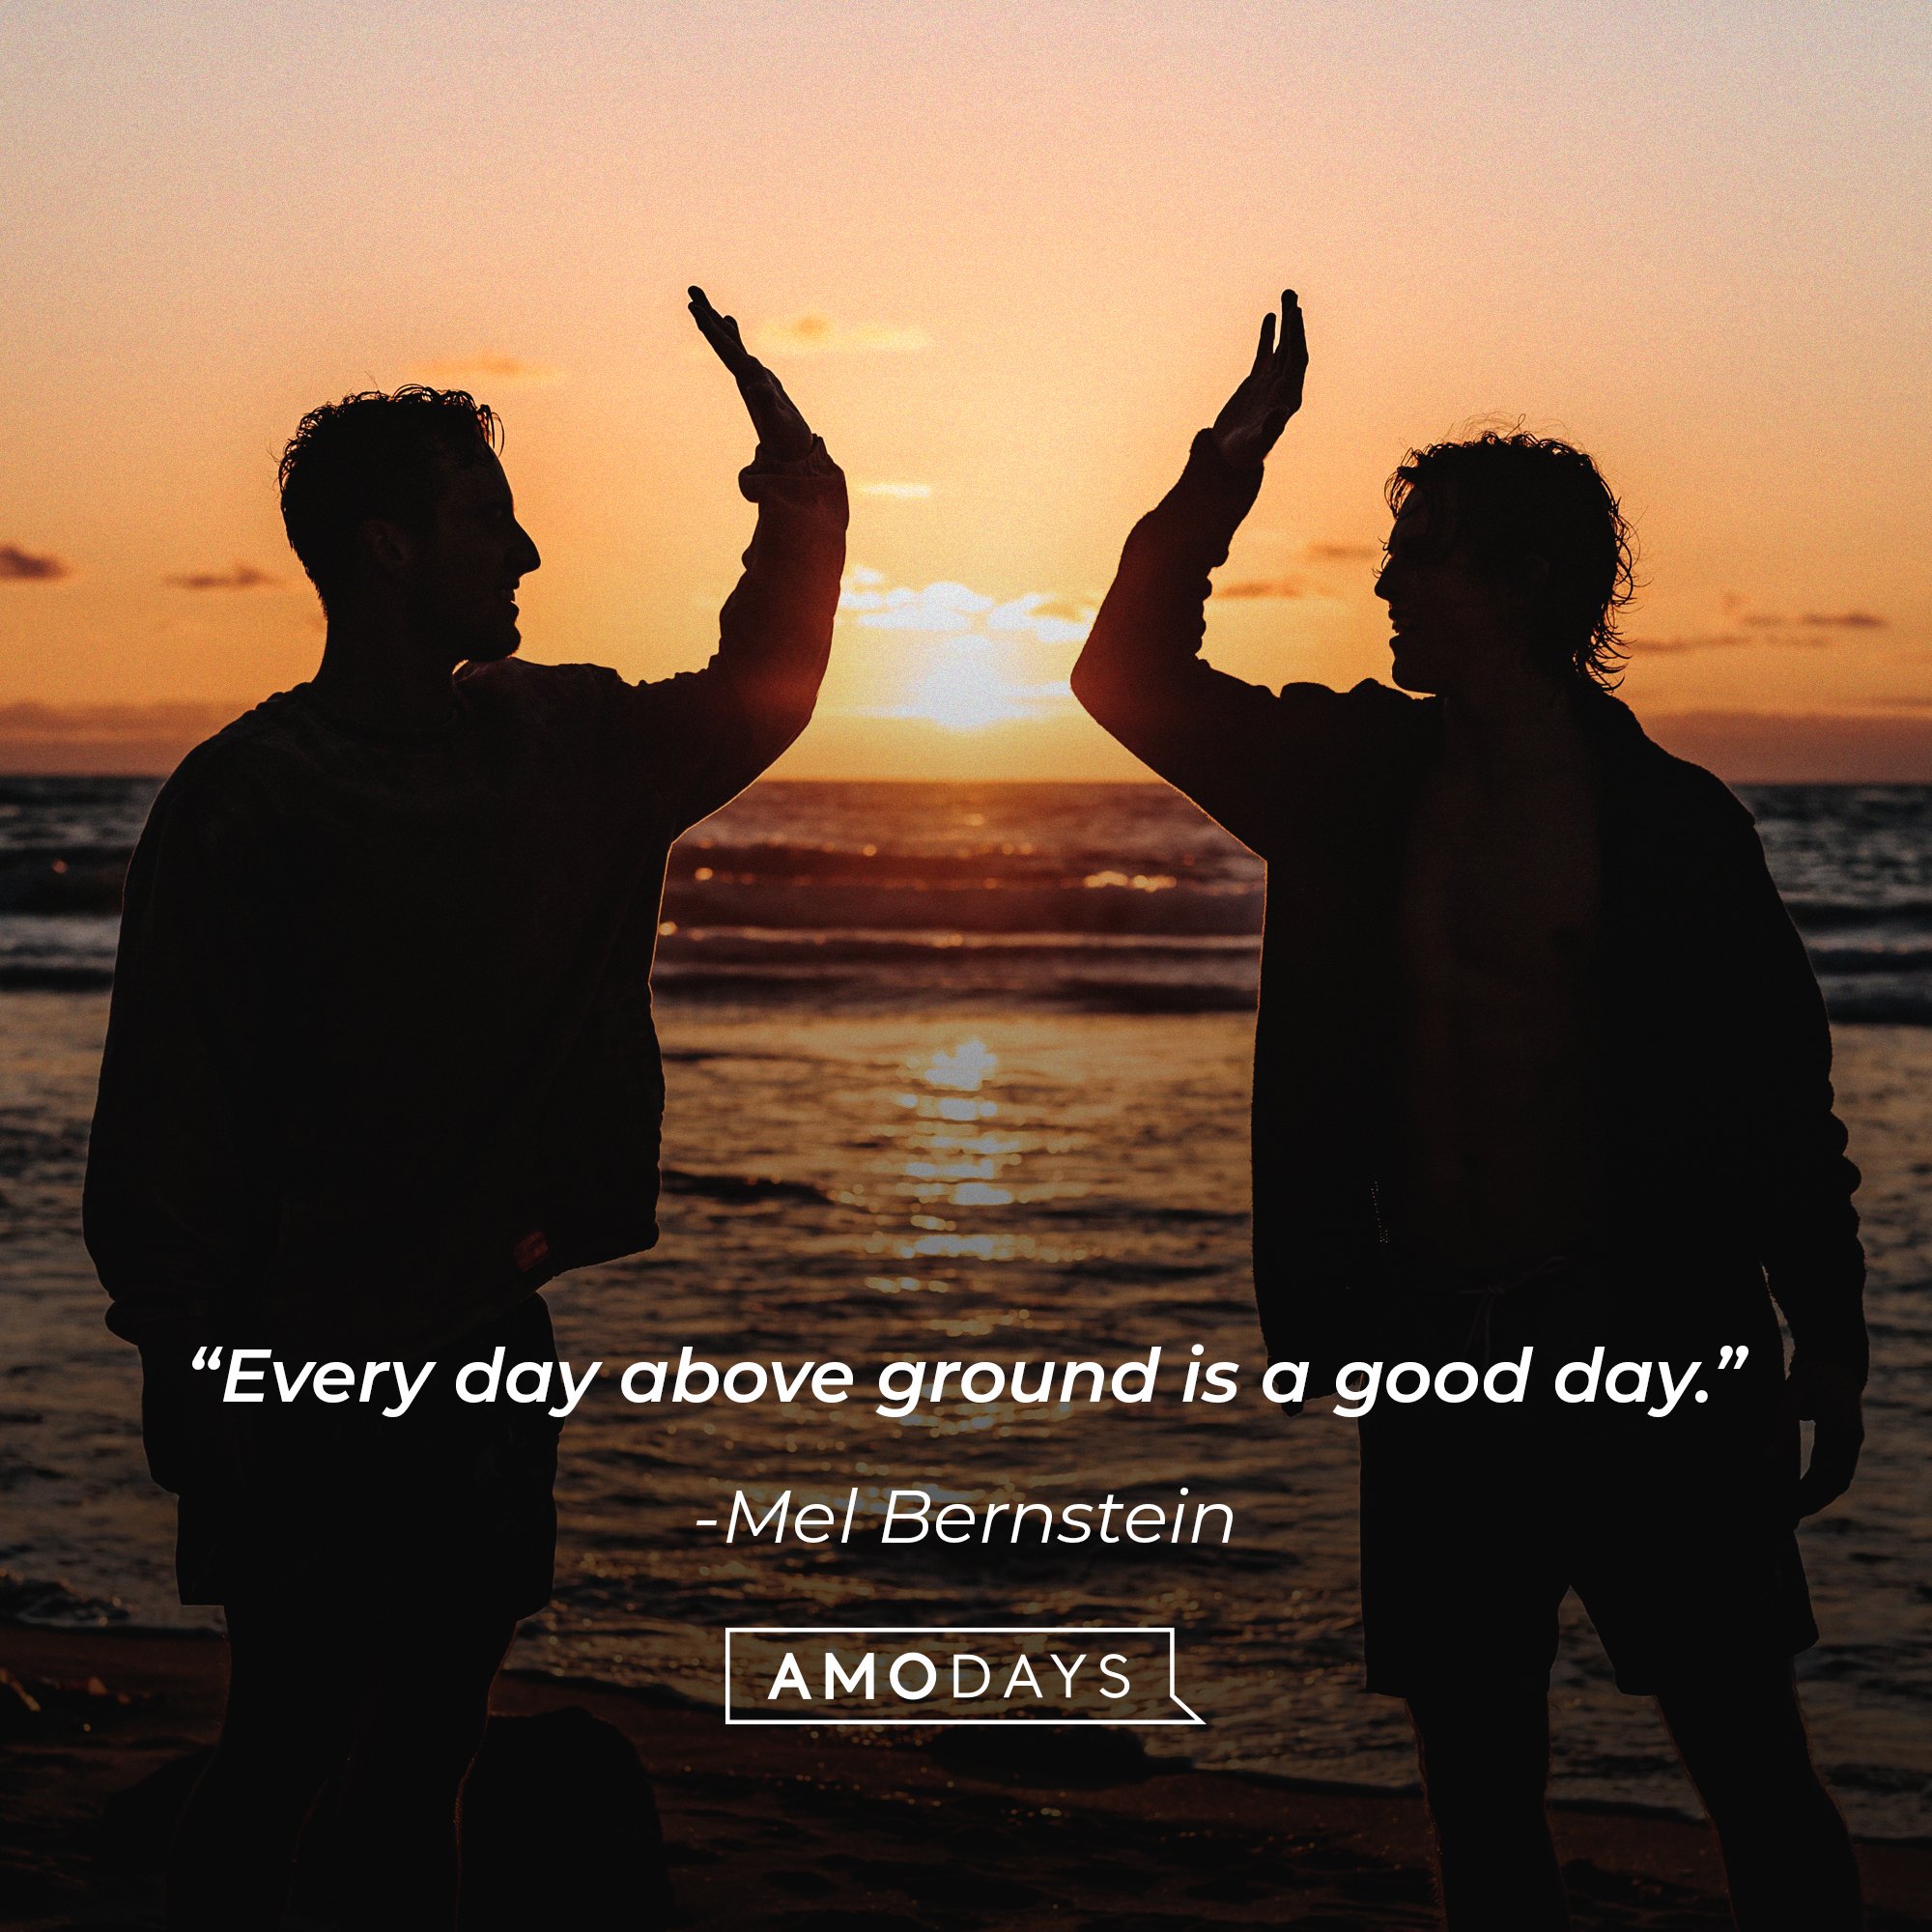  Mel Bernstein’s quote: "Every day above ground is a good day." | Image: AmoDays